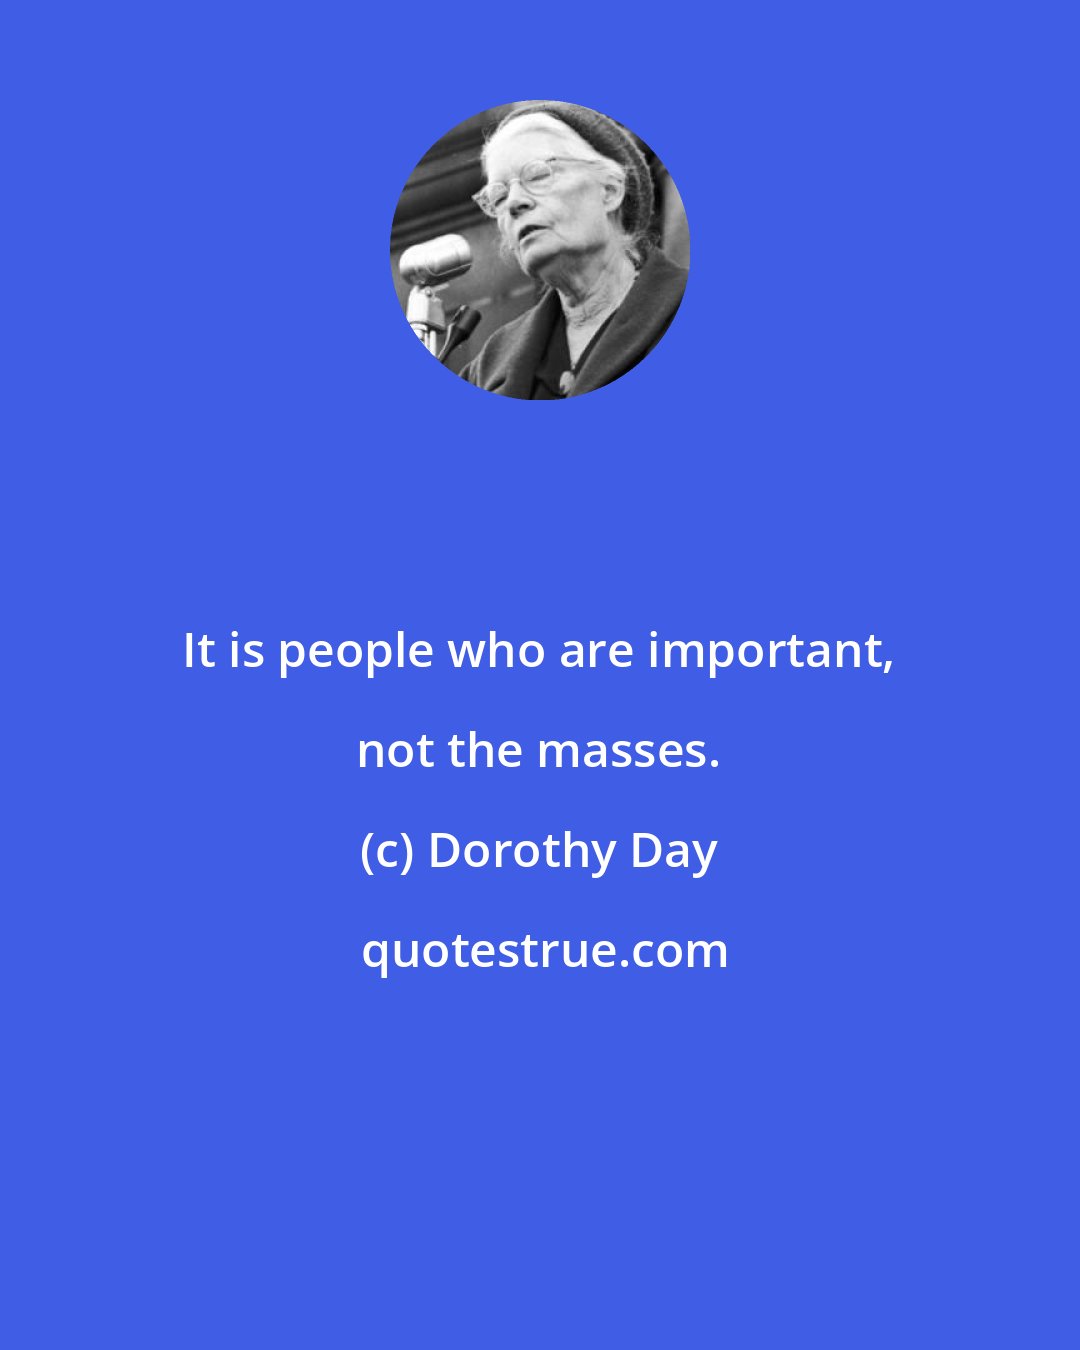 Dorothy Day: It is people who are important, not the masses.